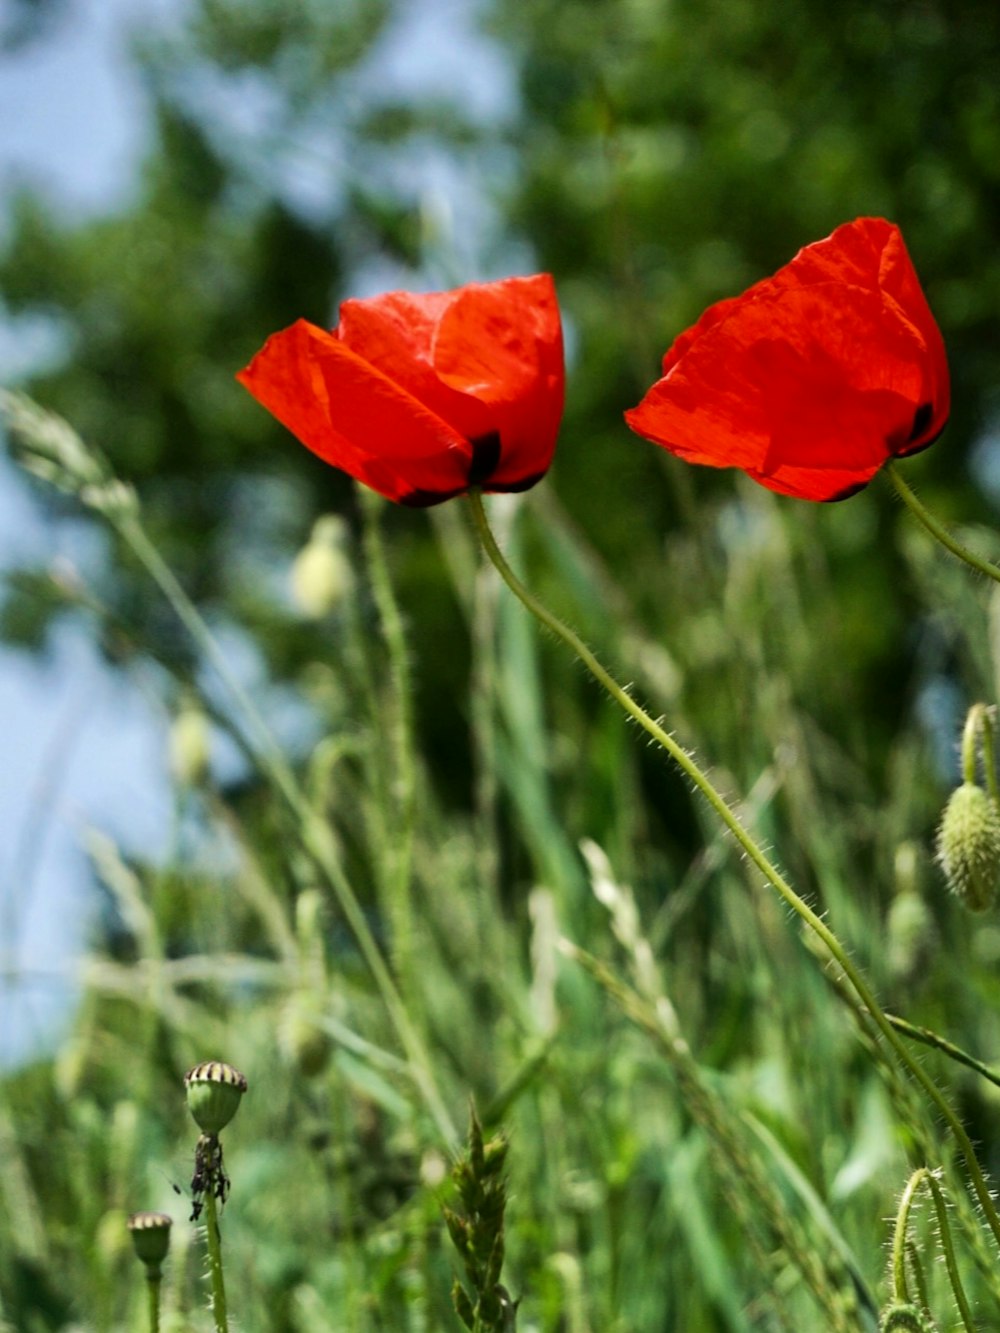 two red poppies in a field of tall grass